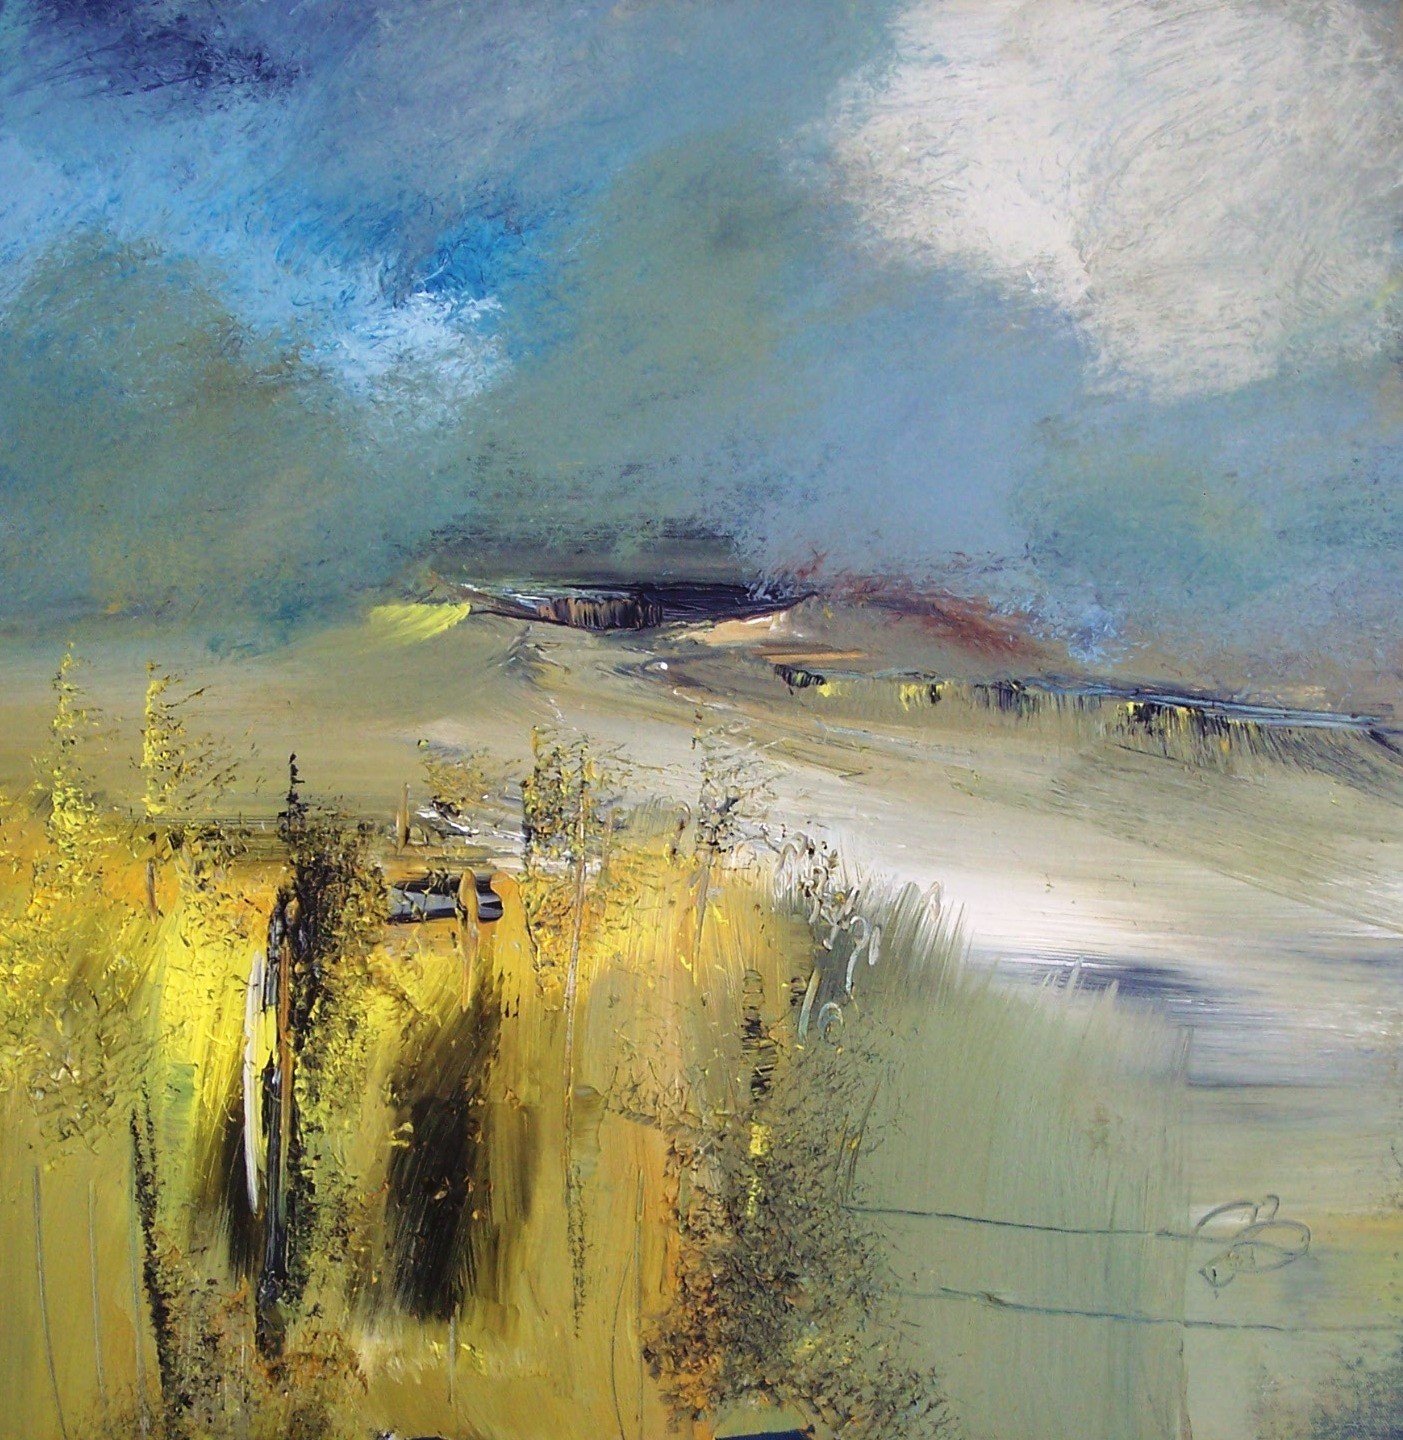 'the sight of the Summit' by artist Rosanne Barr